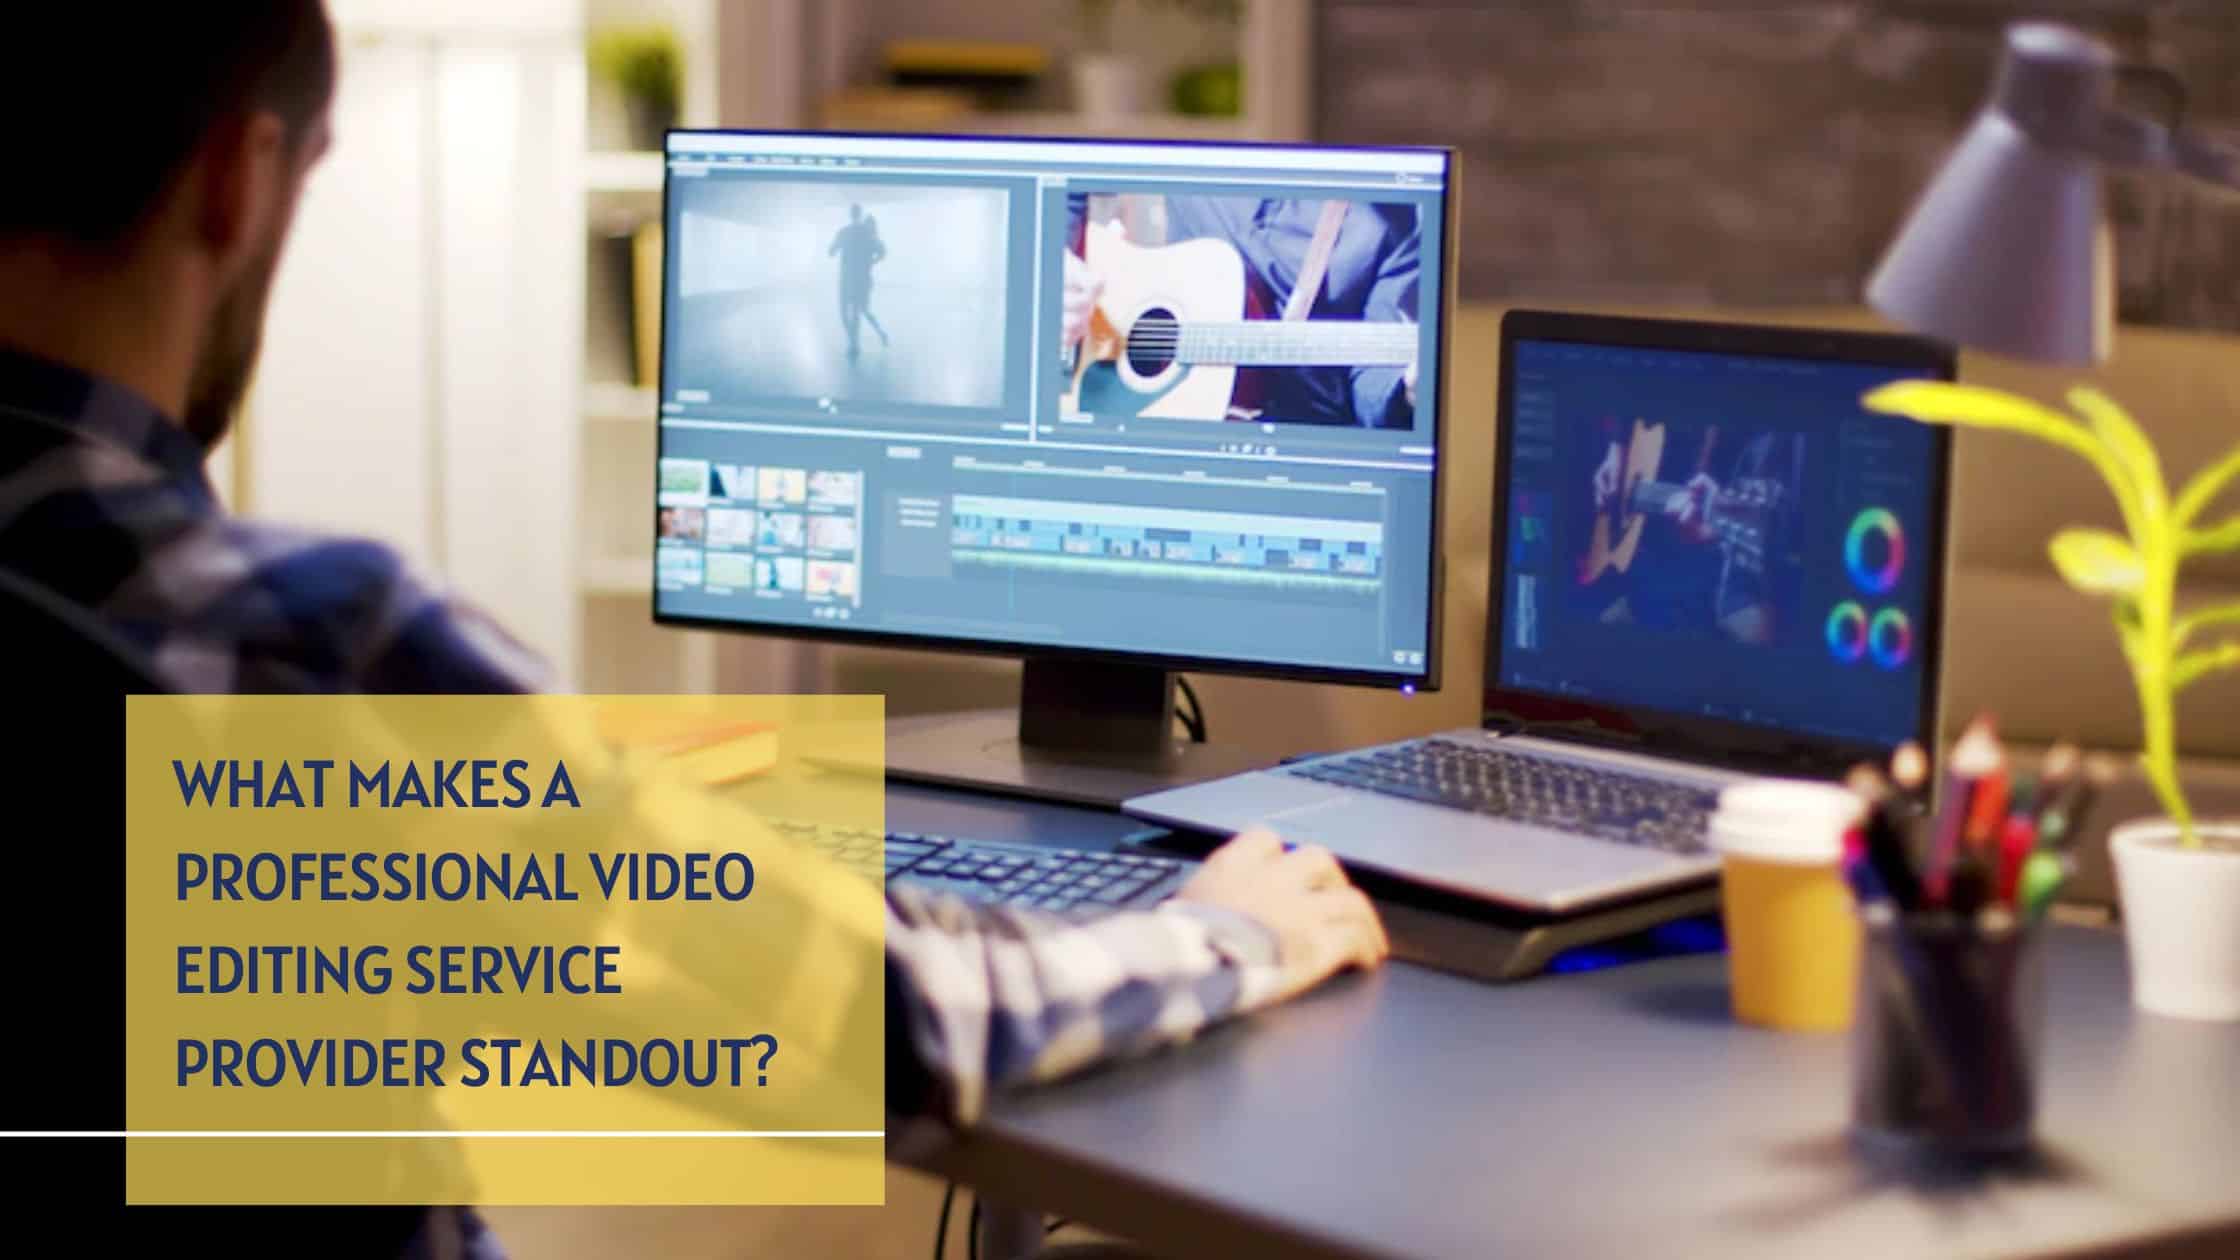 What Makes a Professional Video Editing Service Provider Standout